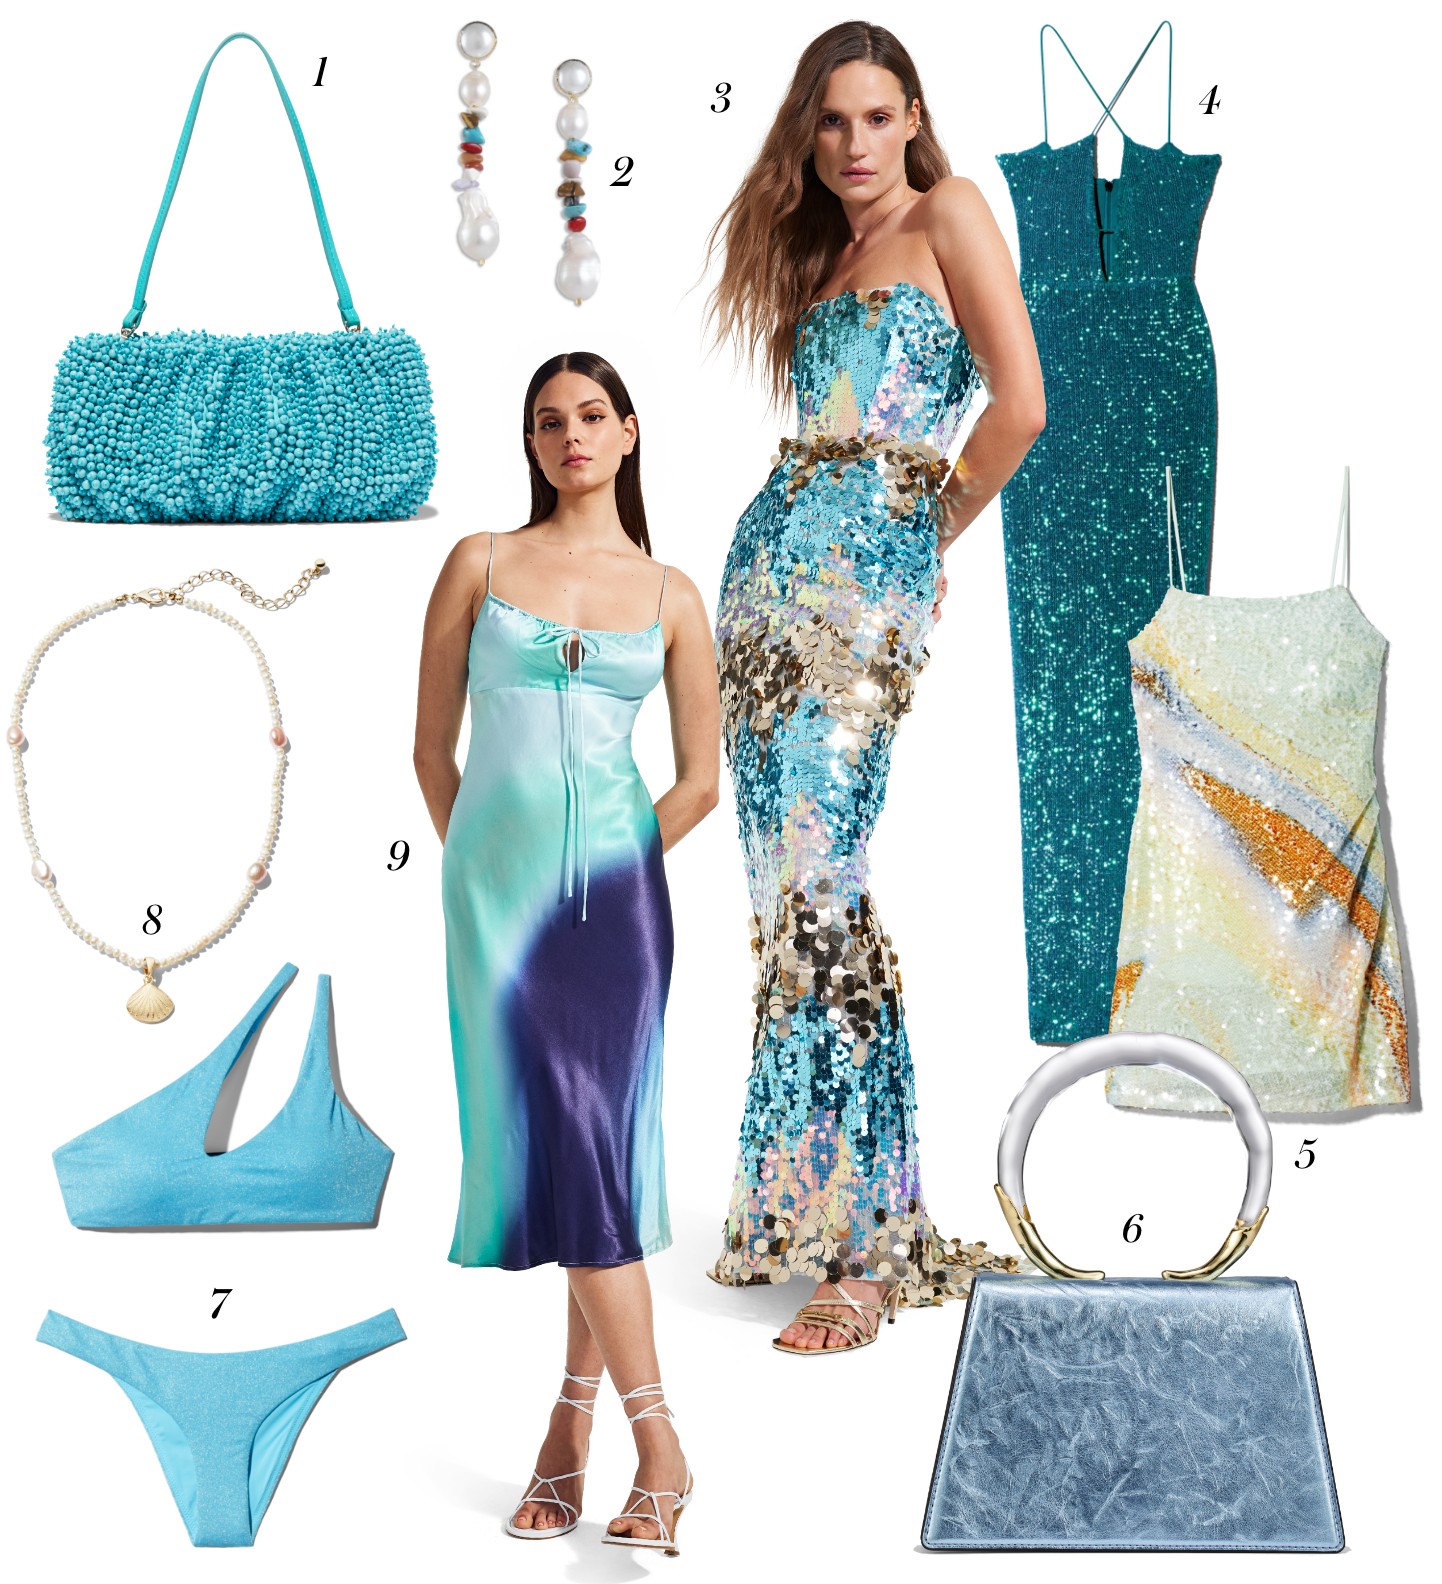 Examples of mermaidcore fashion, including metallic dresses, sequin skirts, sheer dresses and accessories in aquatic hues, as well as other mermaid-style fashion items.